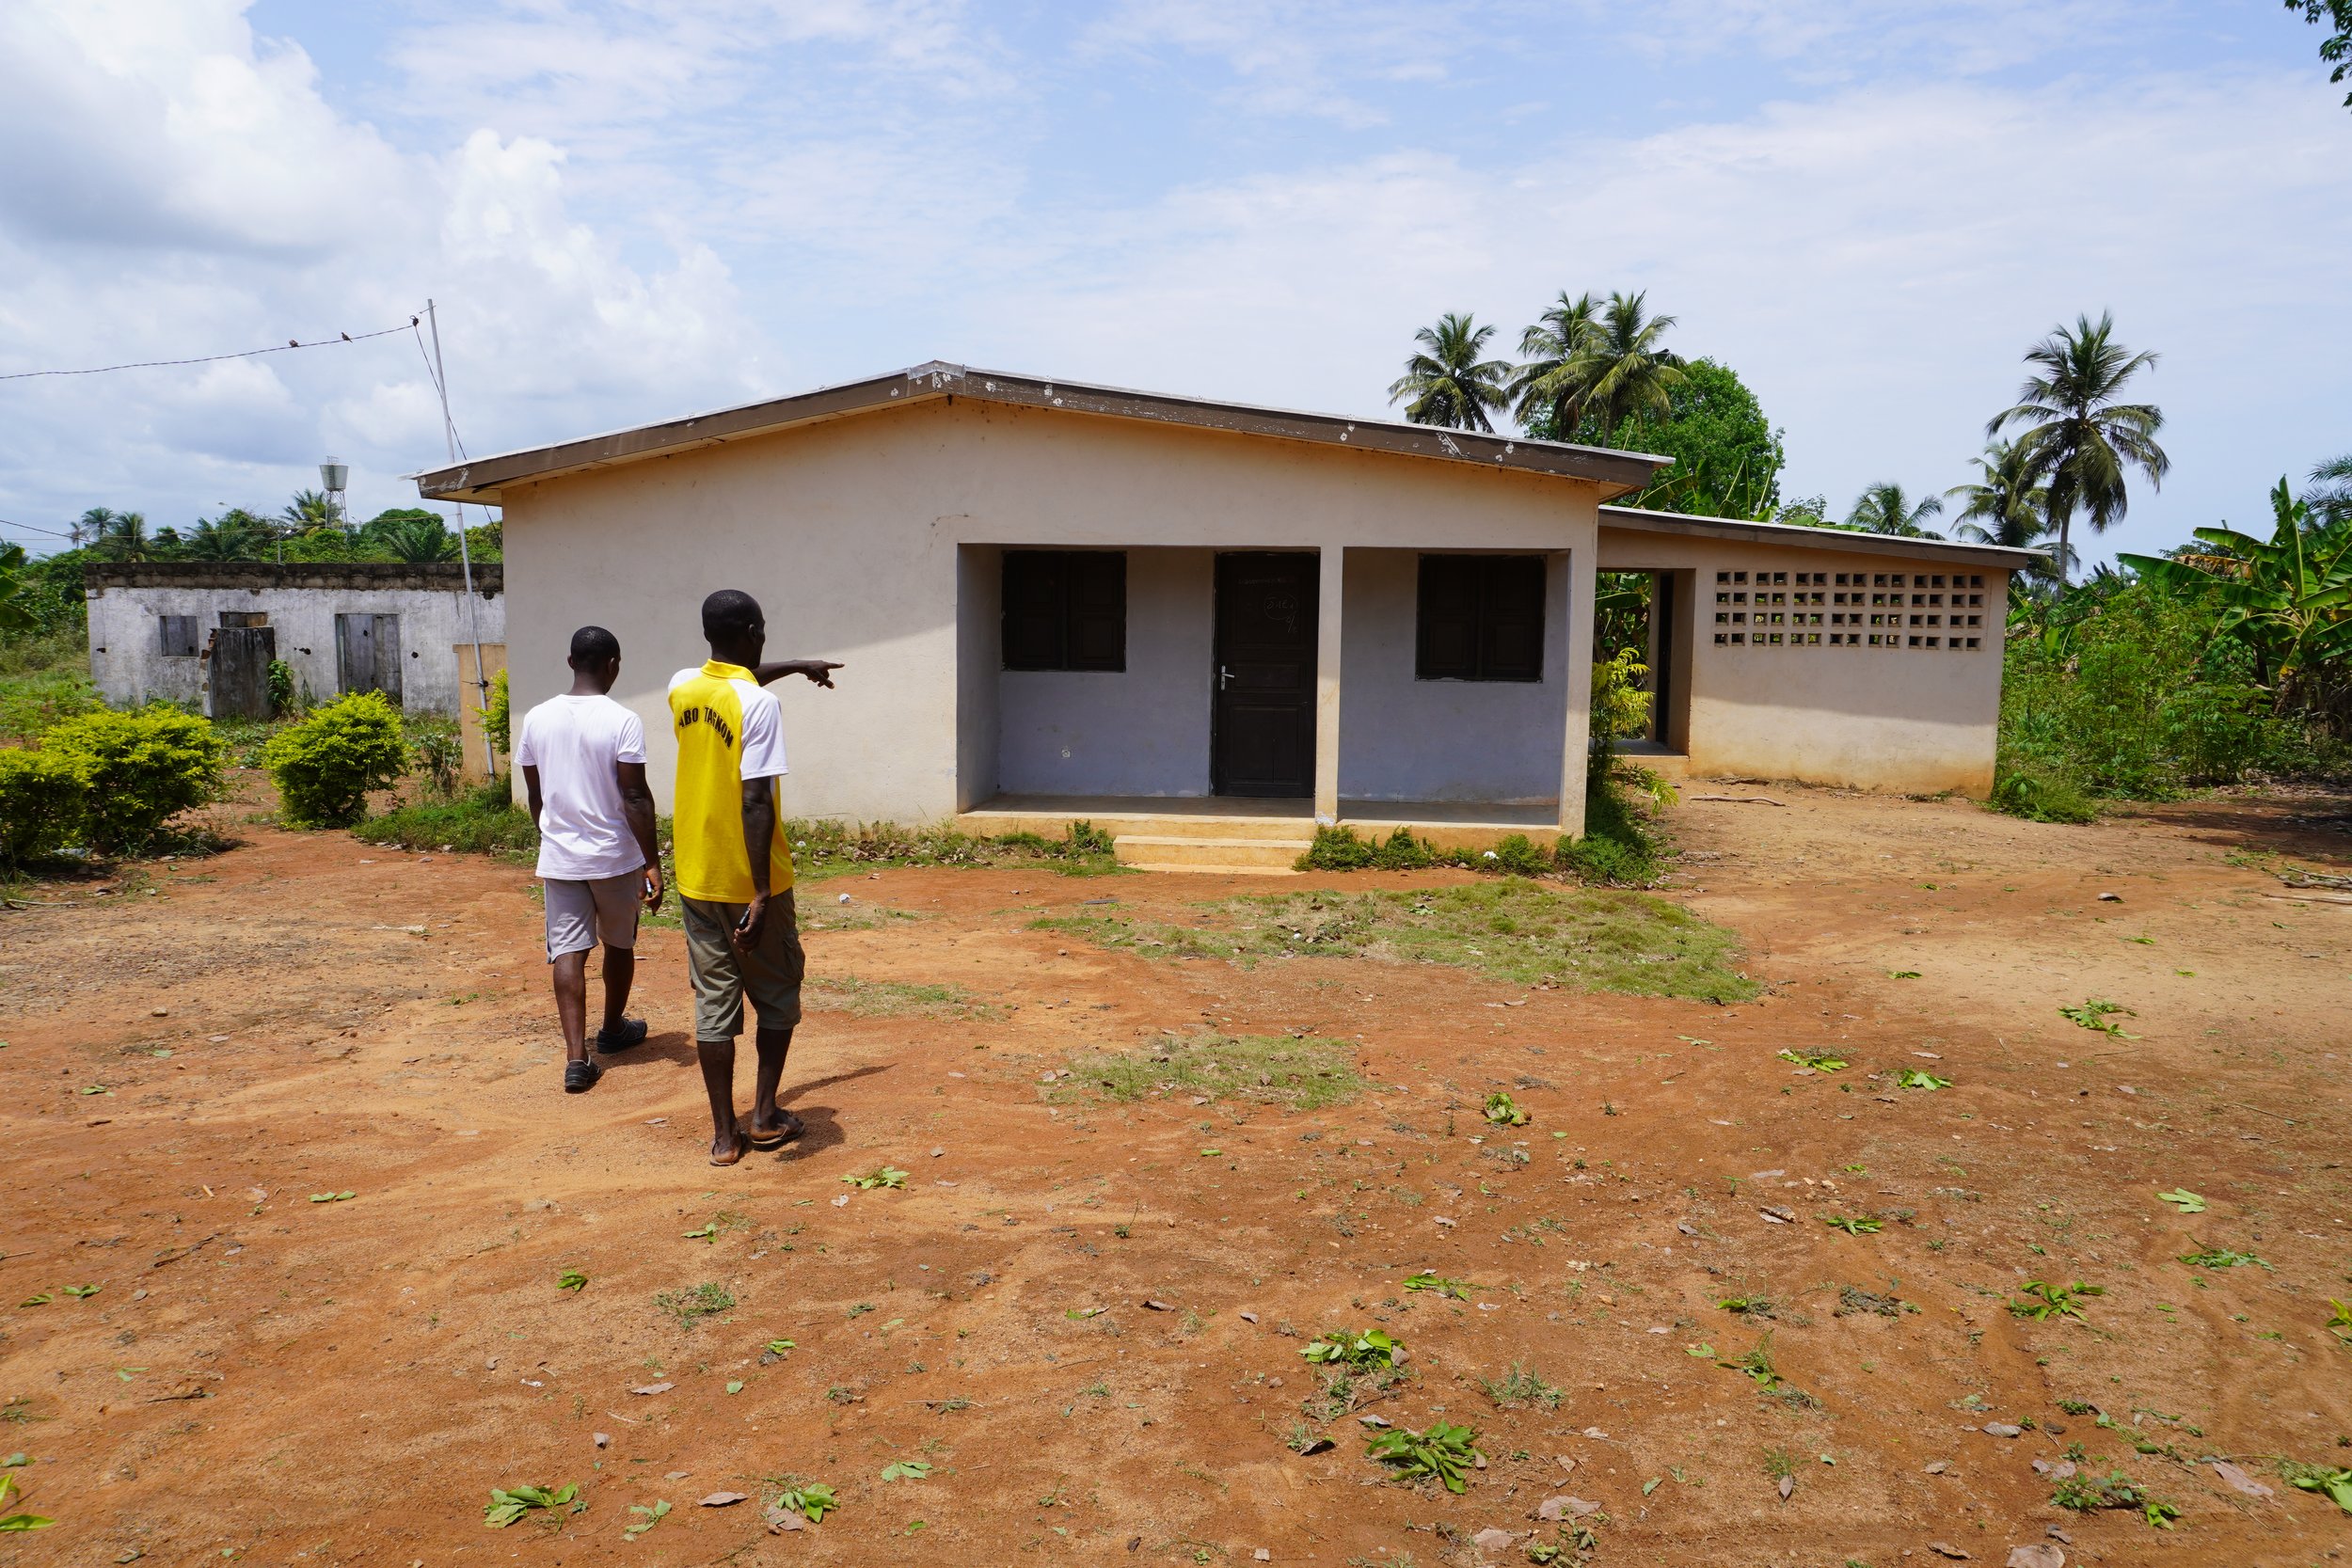  Alex Nabo shows the house of the school headmaster, also built as part of the "Village Project". In the background, on the left, is the water tower financed by the Spanish cooperation. 